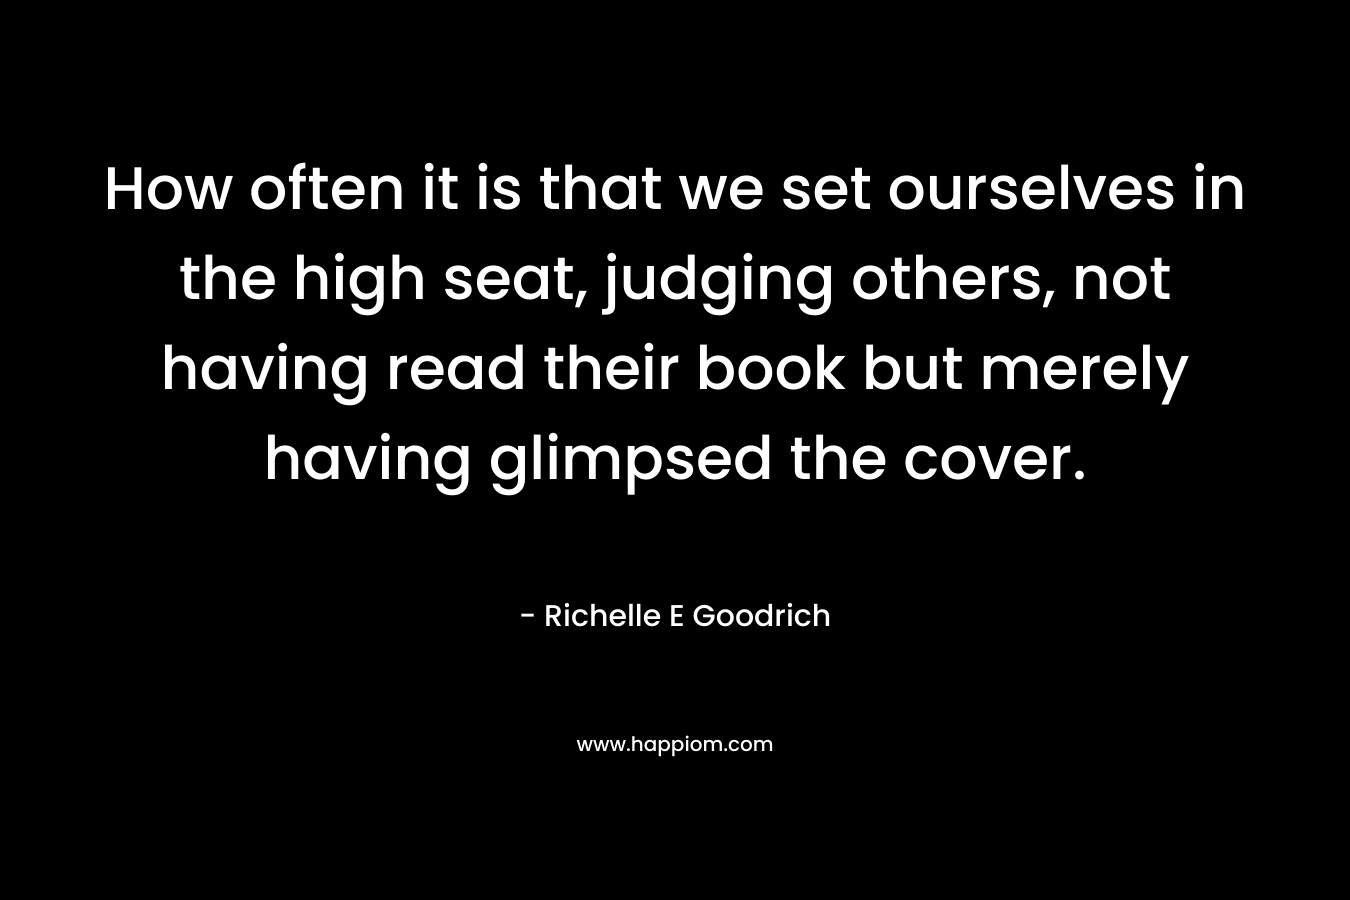 How often it is that we set ourselves in the high seat, judging others, not having read their book but merely having glimpsed the cover.